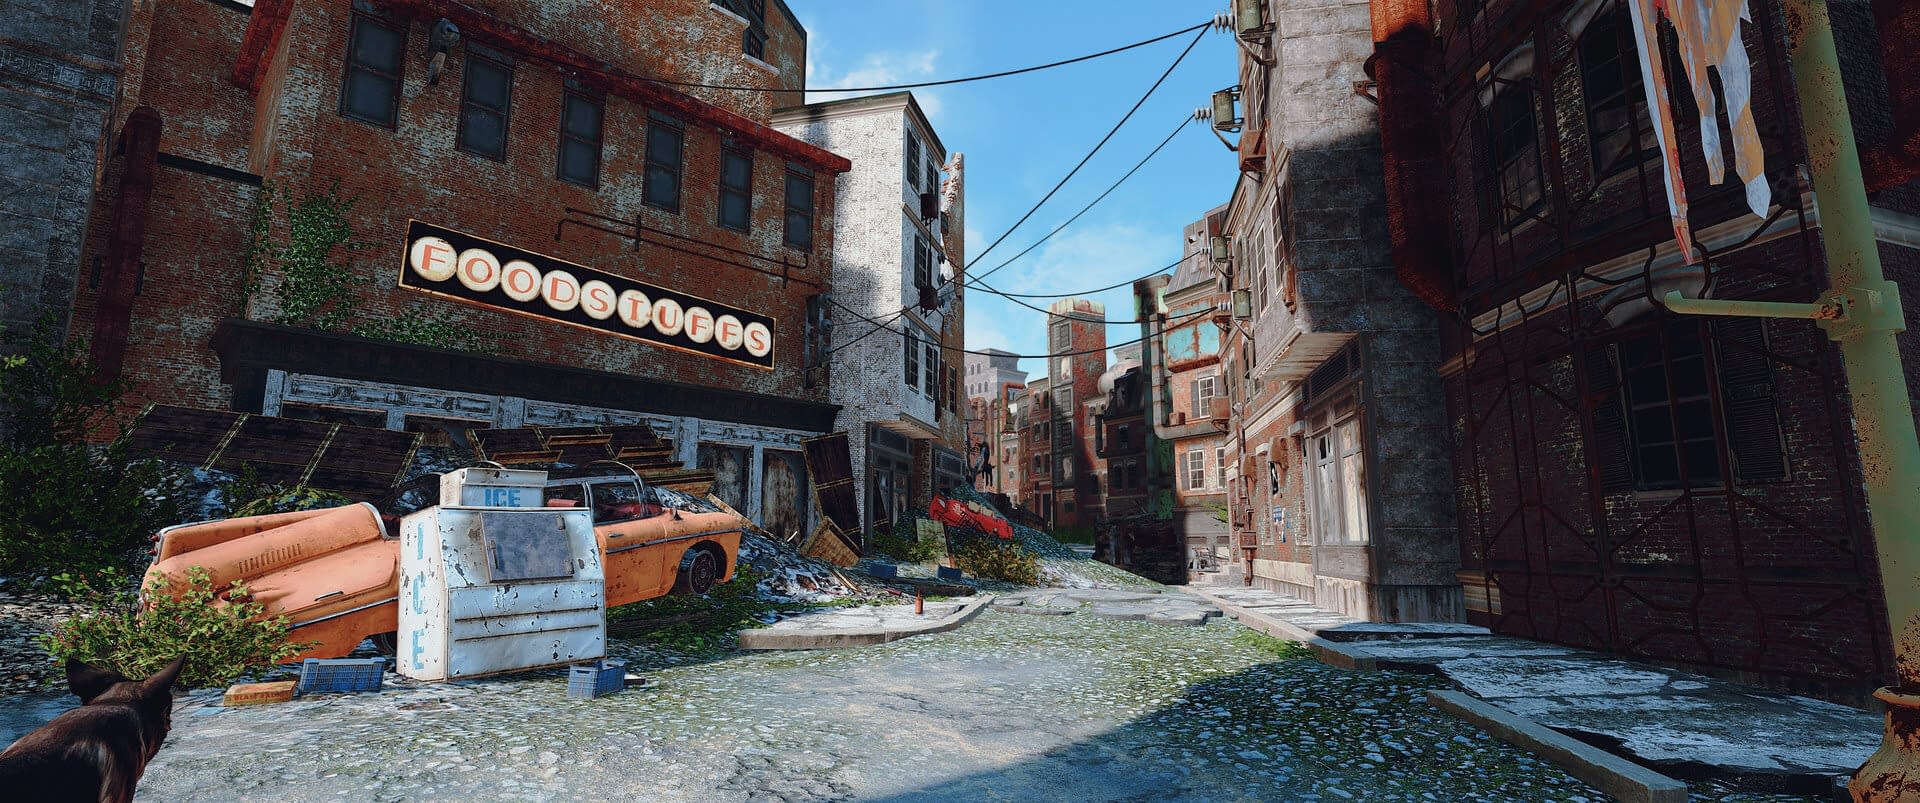 43 GB HD Texture Pack for Fallout 4 Released